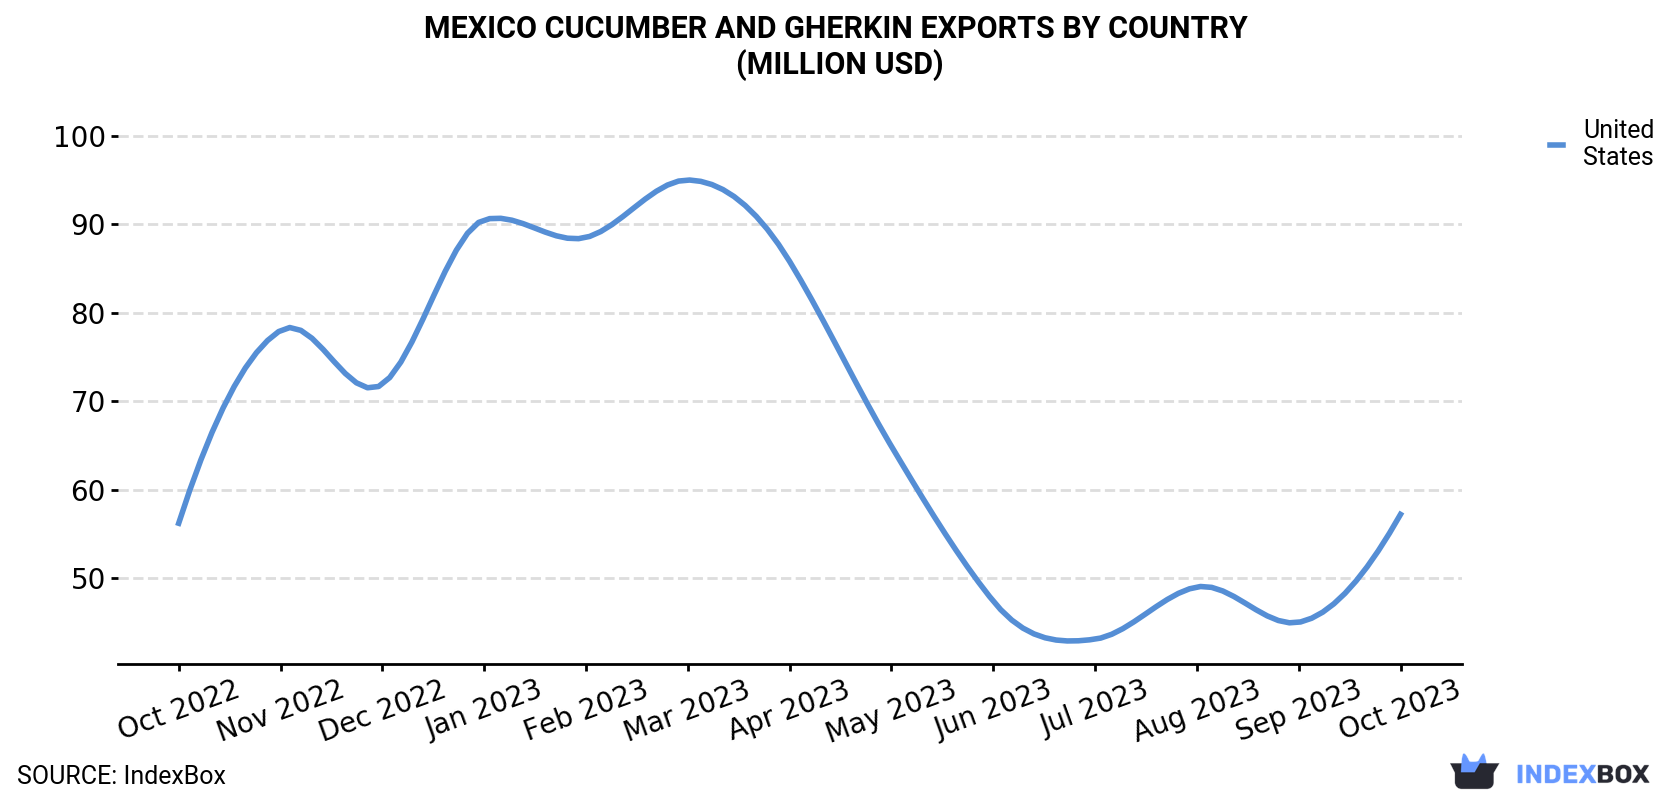 Mexico Cucumber And Gherkin Exports By Country (Million USD)